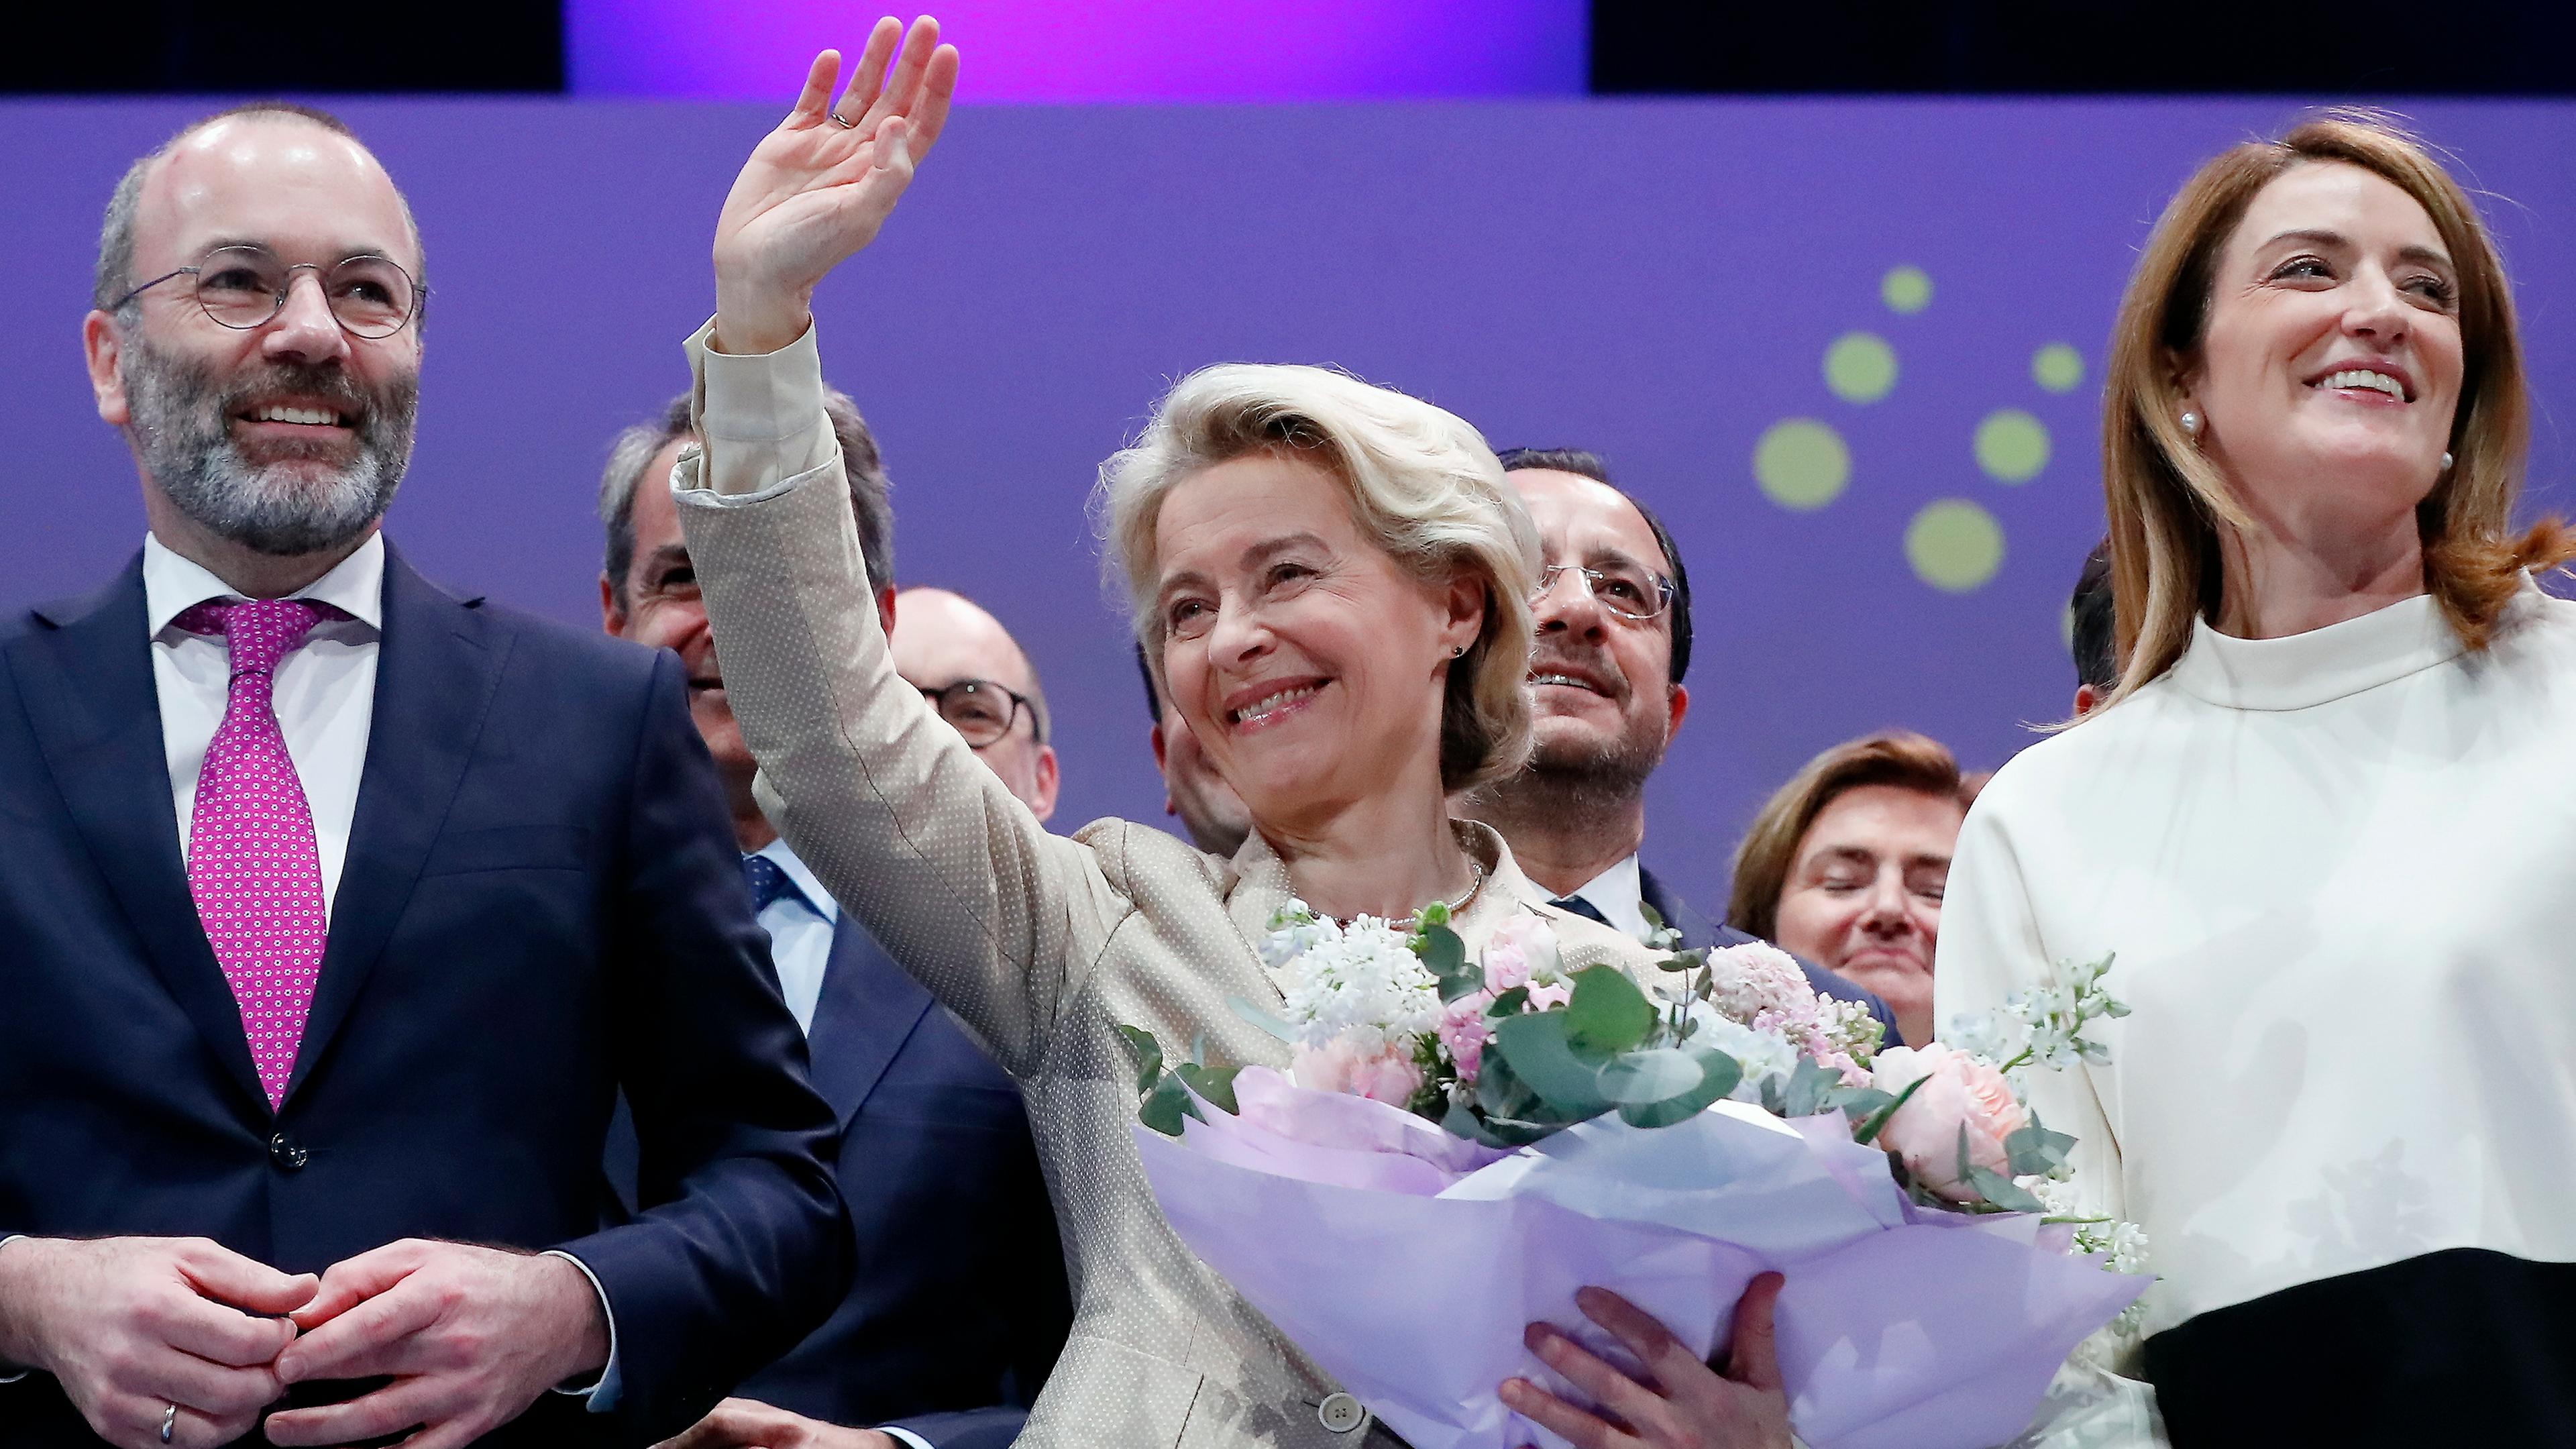 European Commission President Ursula von der Leyen (C), the EPP candidate for the same position, celebrates with EPP president Manfred Weber (L) and European Parliament President Roberta Metsola (R), after winning the ballot at the European People's Party Congress in Bucharest, Romania, 07 March 2024